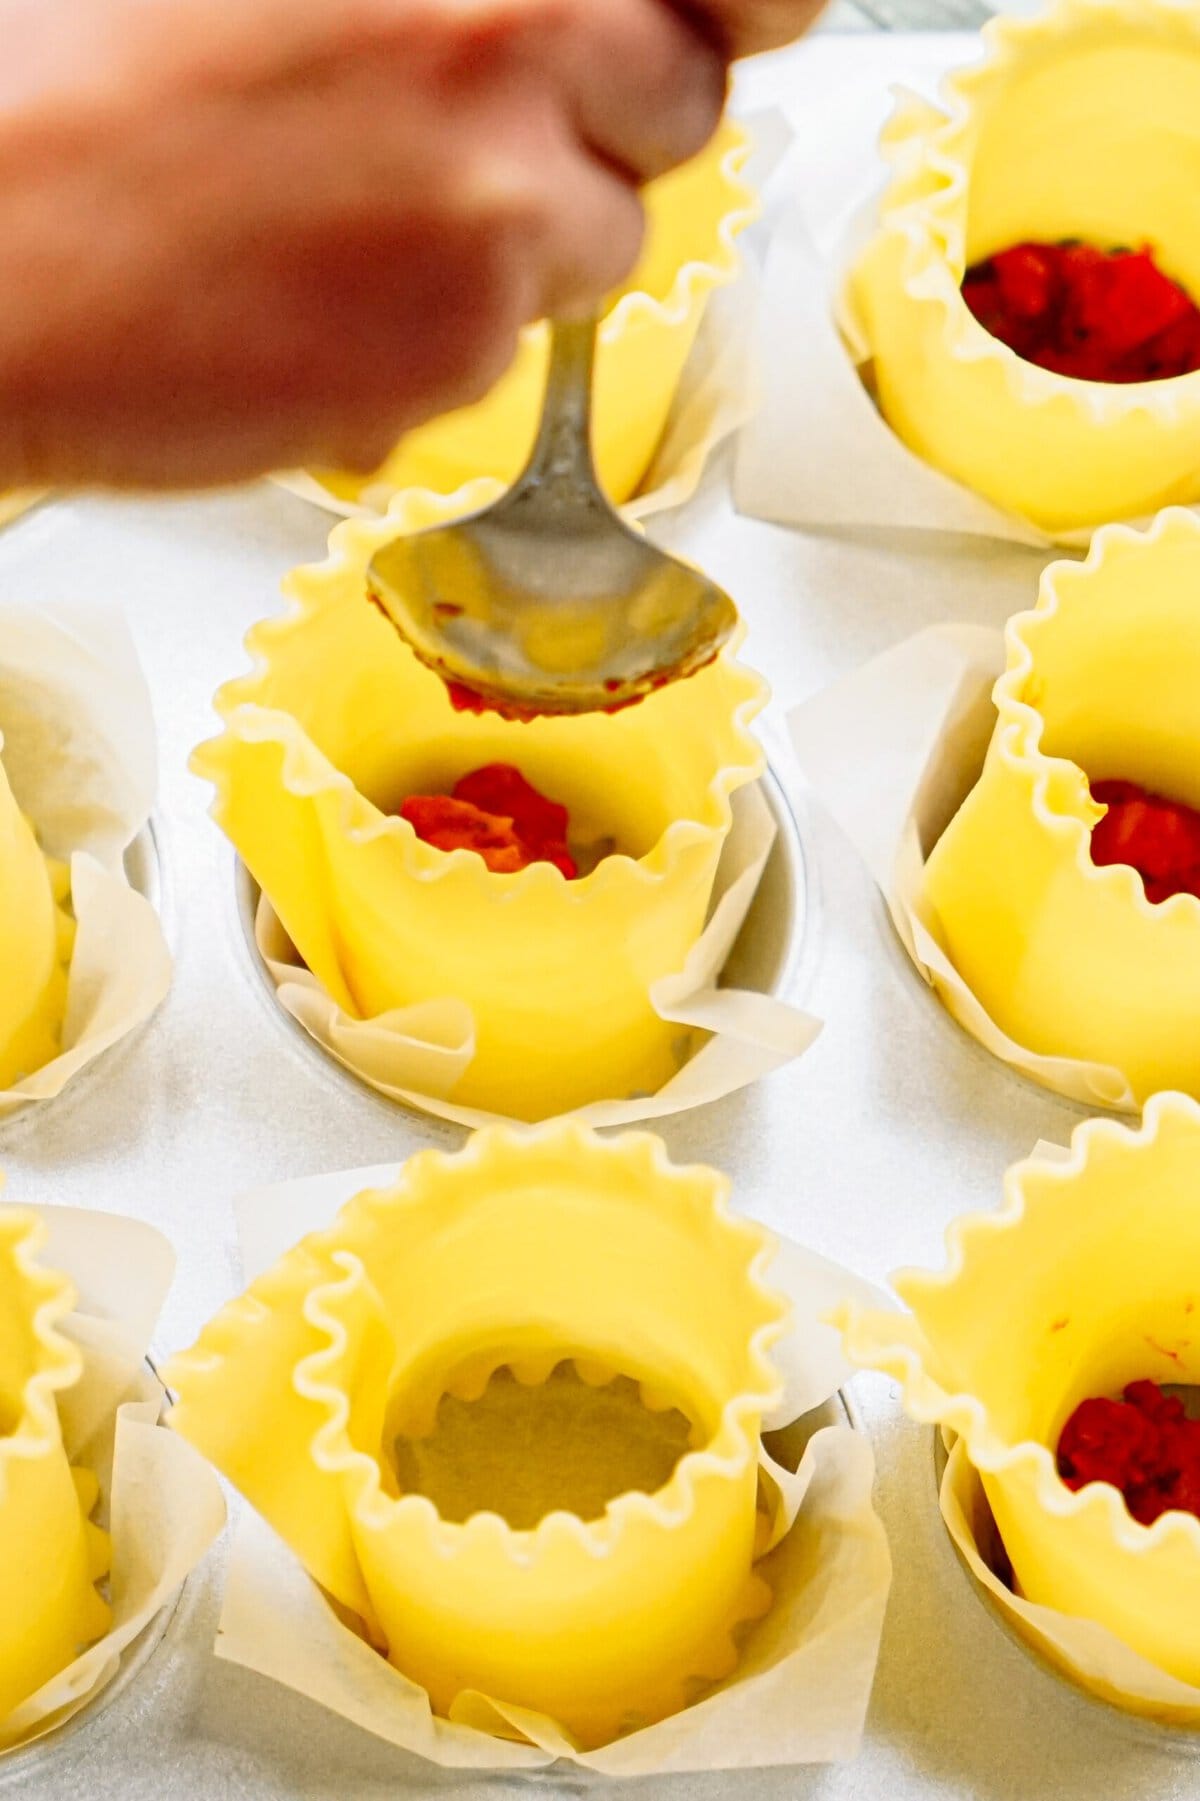 A person is spooning tomato sauce into yellow lasagna noodle cups lined with parchment paper in a muffin tray.